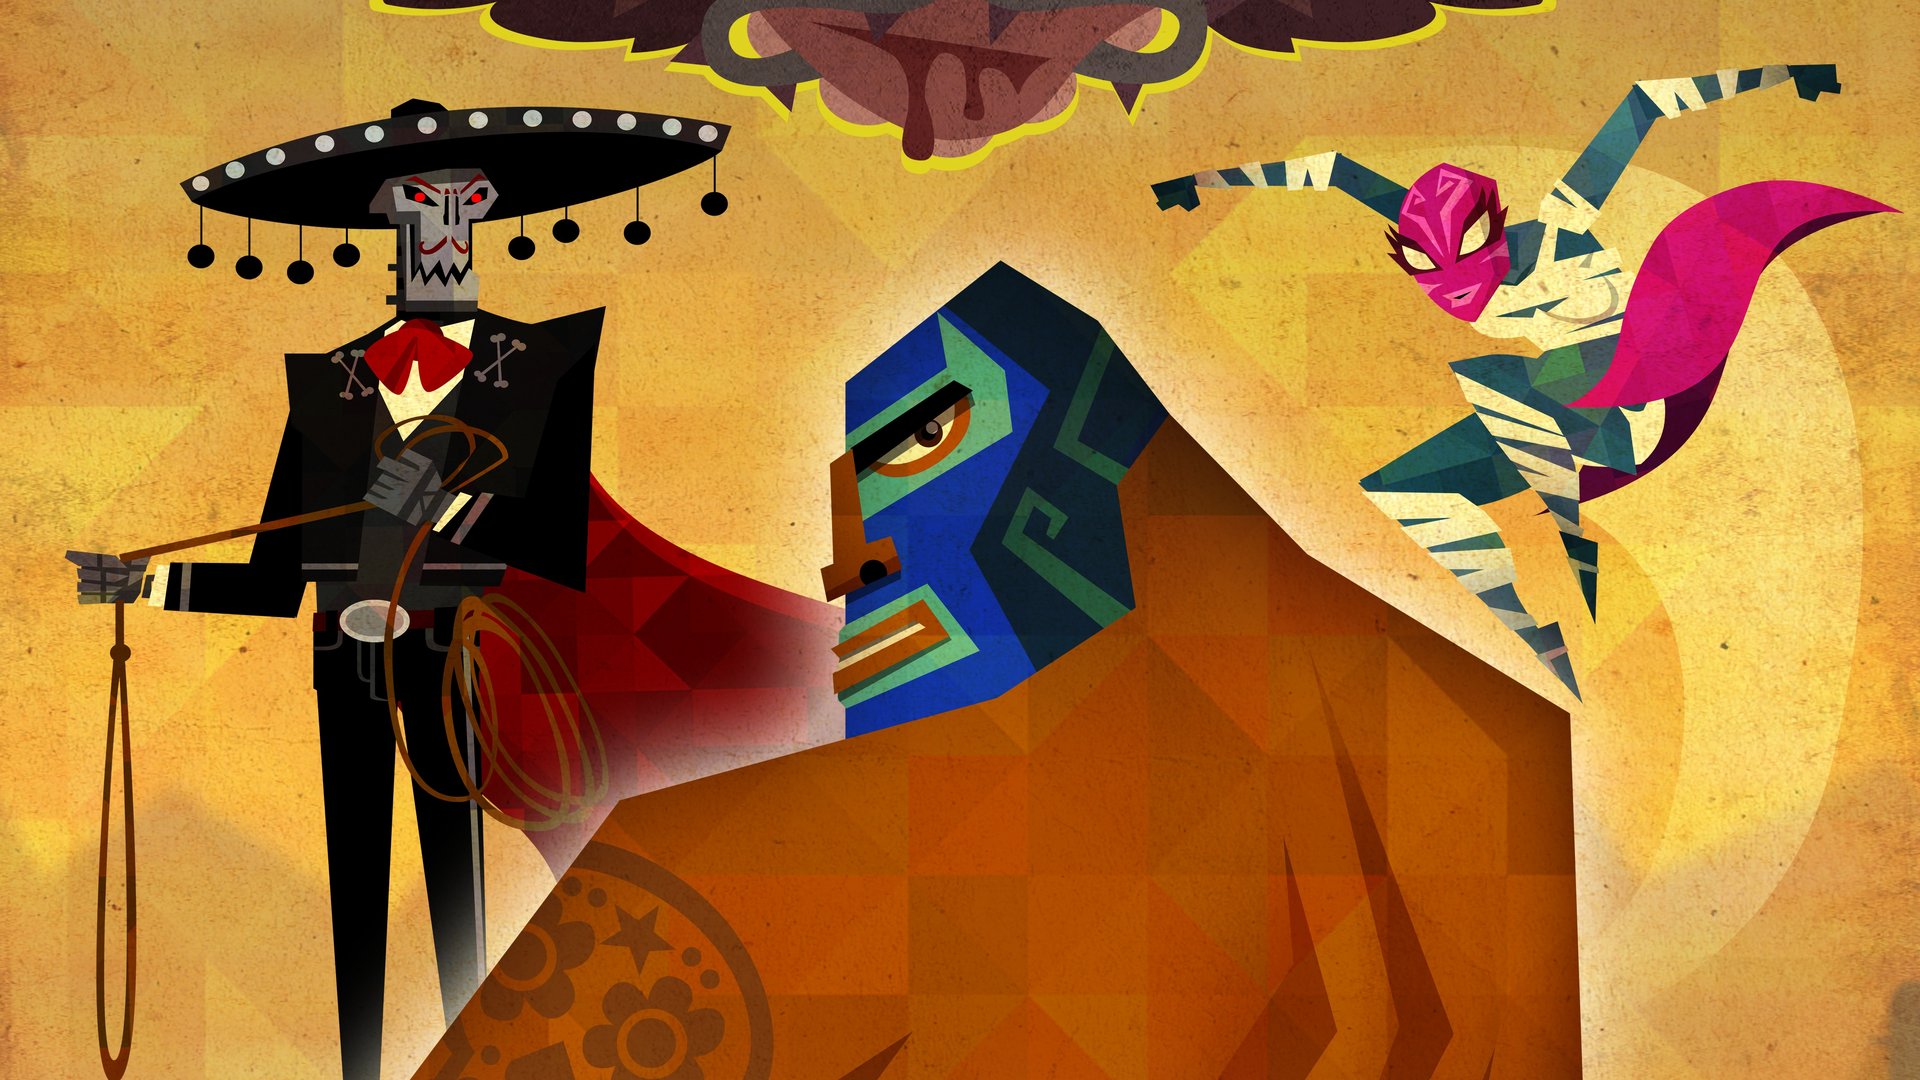 Guacamelee Super Turbo Championship Edition release date august 21